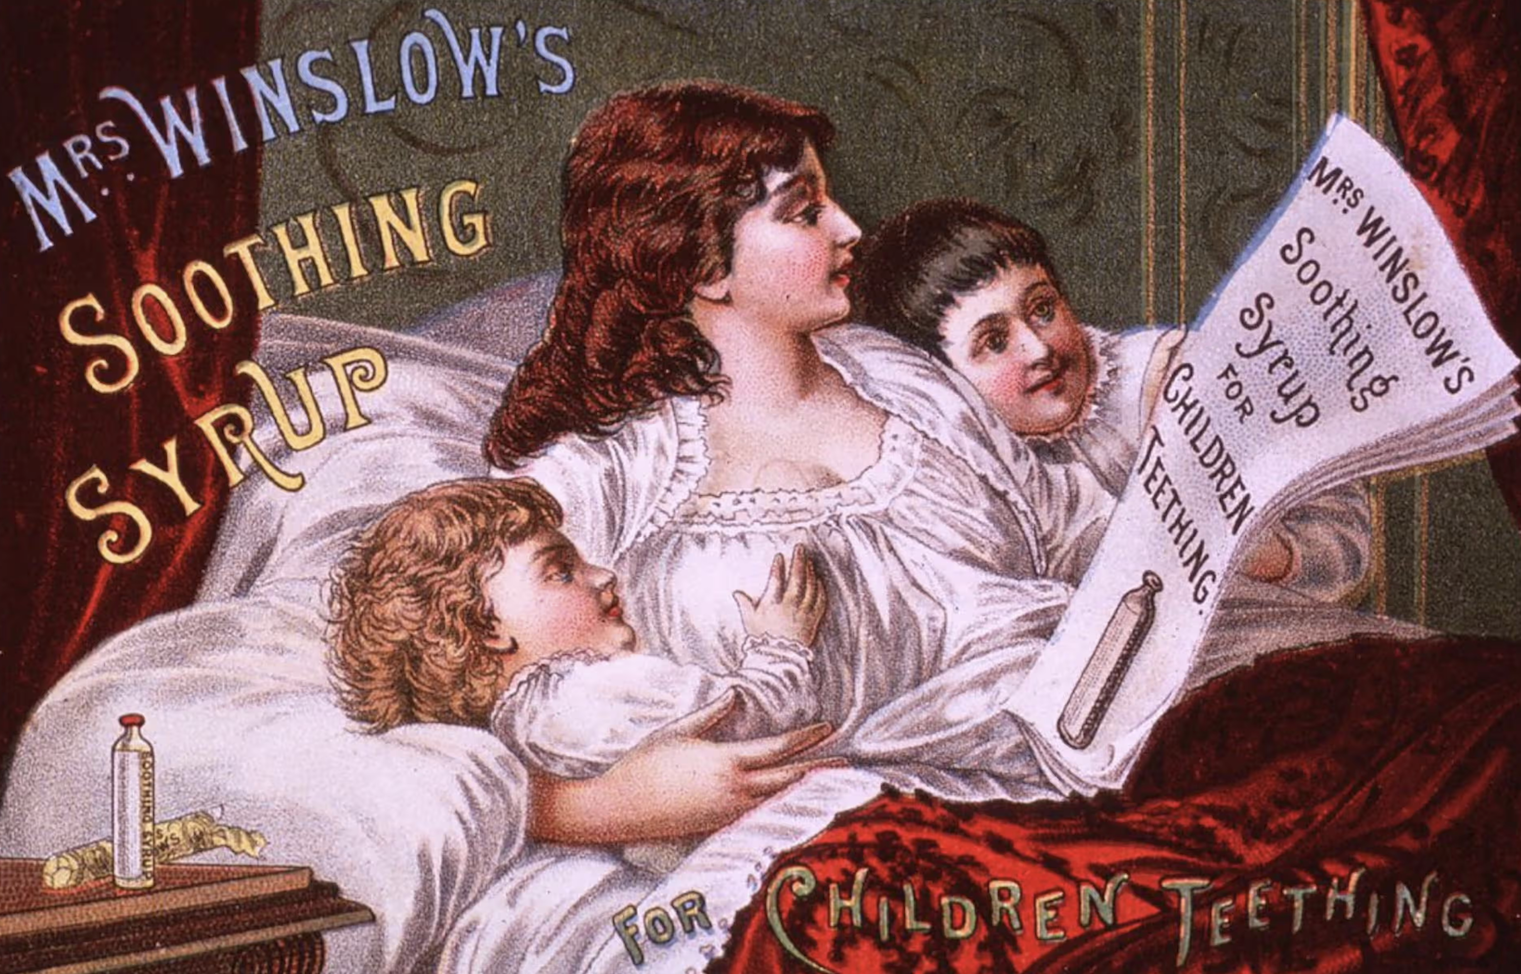 This is a 1910 ad for “Mrs Winslow’s soothing syrup.” It featured 65mg of morphine per ounce, plus alcohol, and sold over 1.5 million bottles annually. It is believed to have been responsible for a huge number of infant mortalities. 